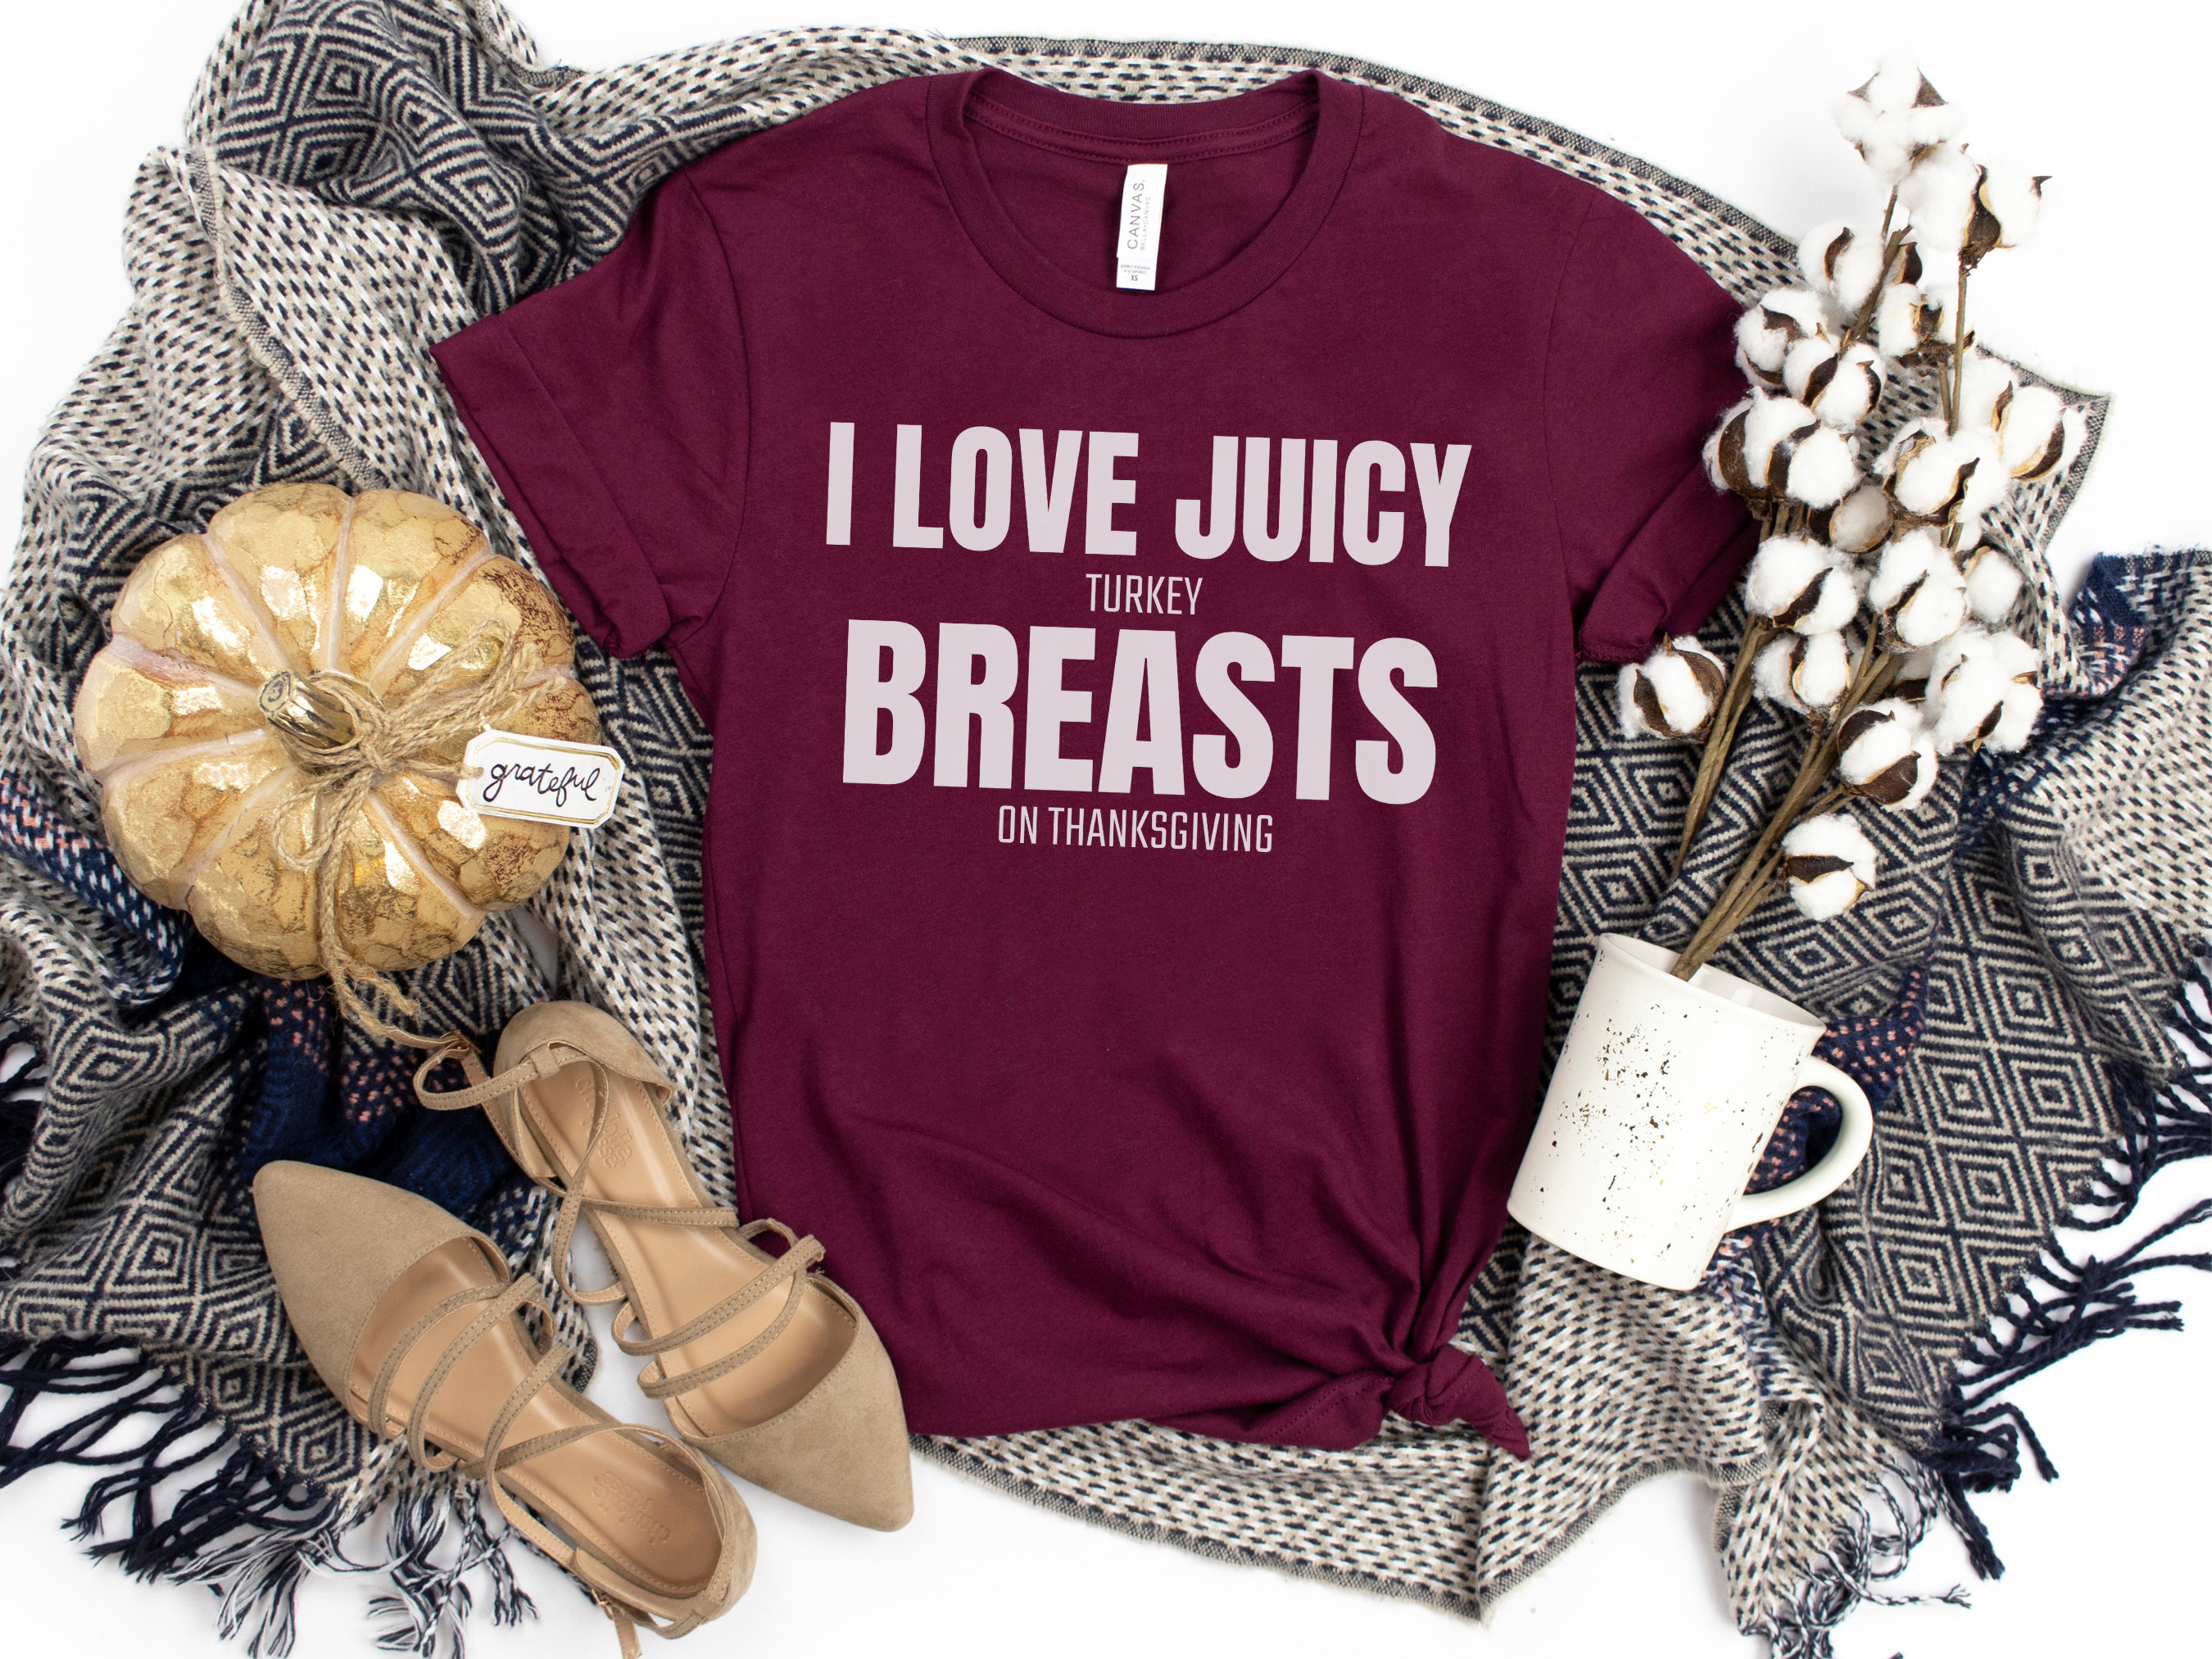 Great Boobs T-shirt. I Know, They're Great Funny Big Breasts Humor Shirt 